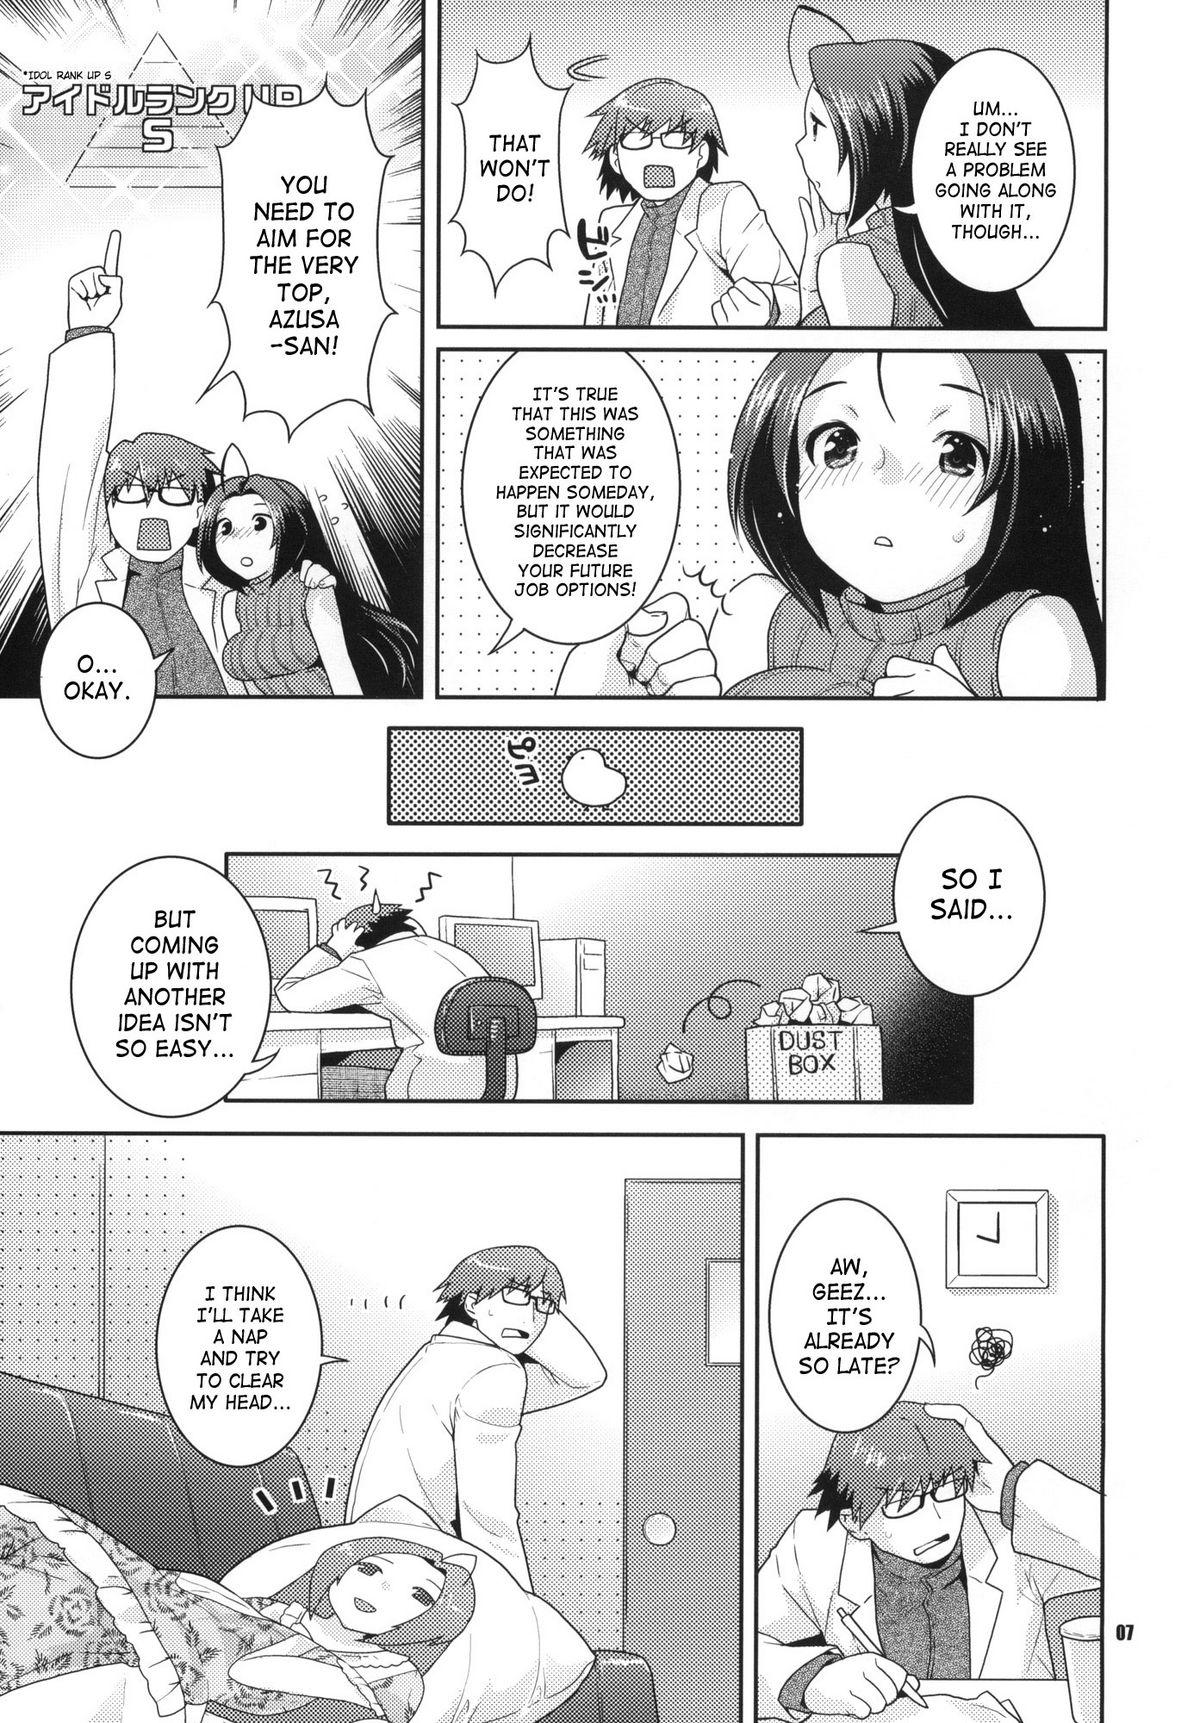 Family Porn Juicy Pillow Talk - The idolmaster Aussie - Page 6